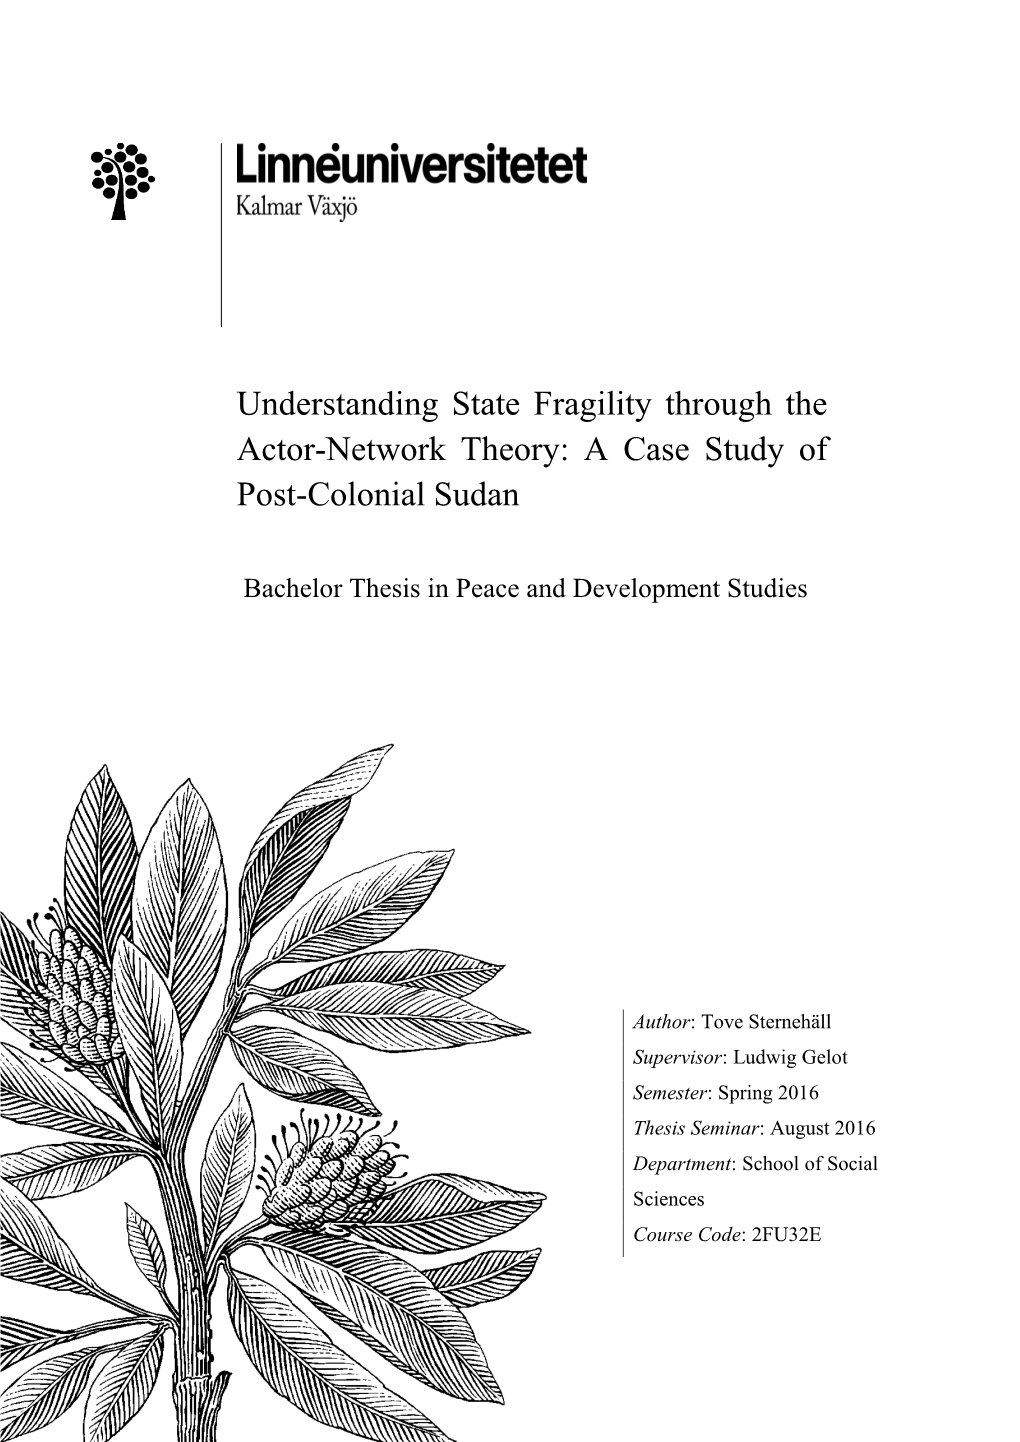 Understanding State Fragility Through the Actor-Network Theory: a Case Study of Post-Colonial Sudan